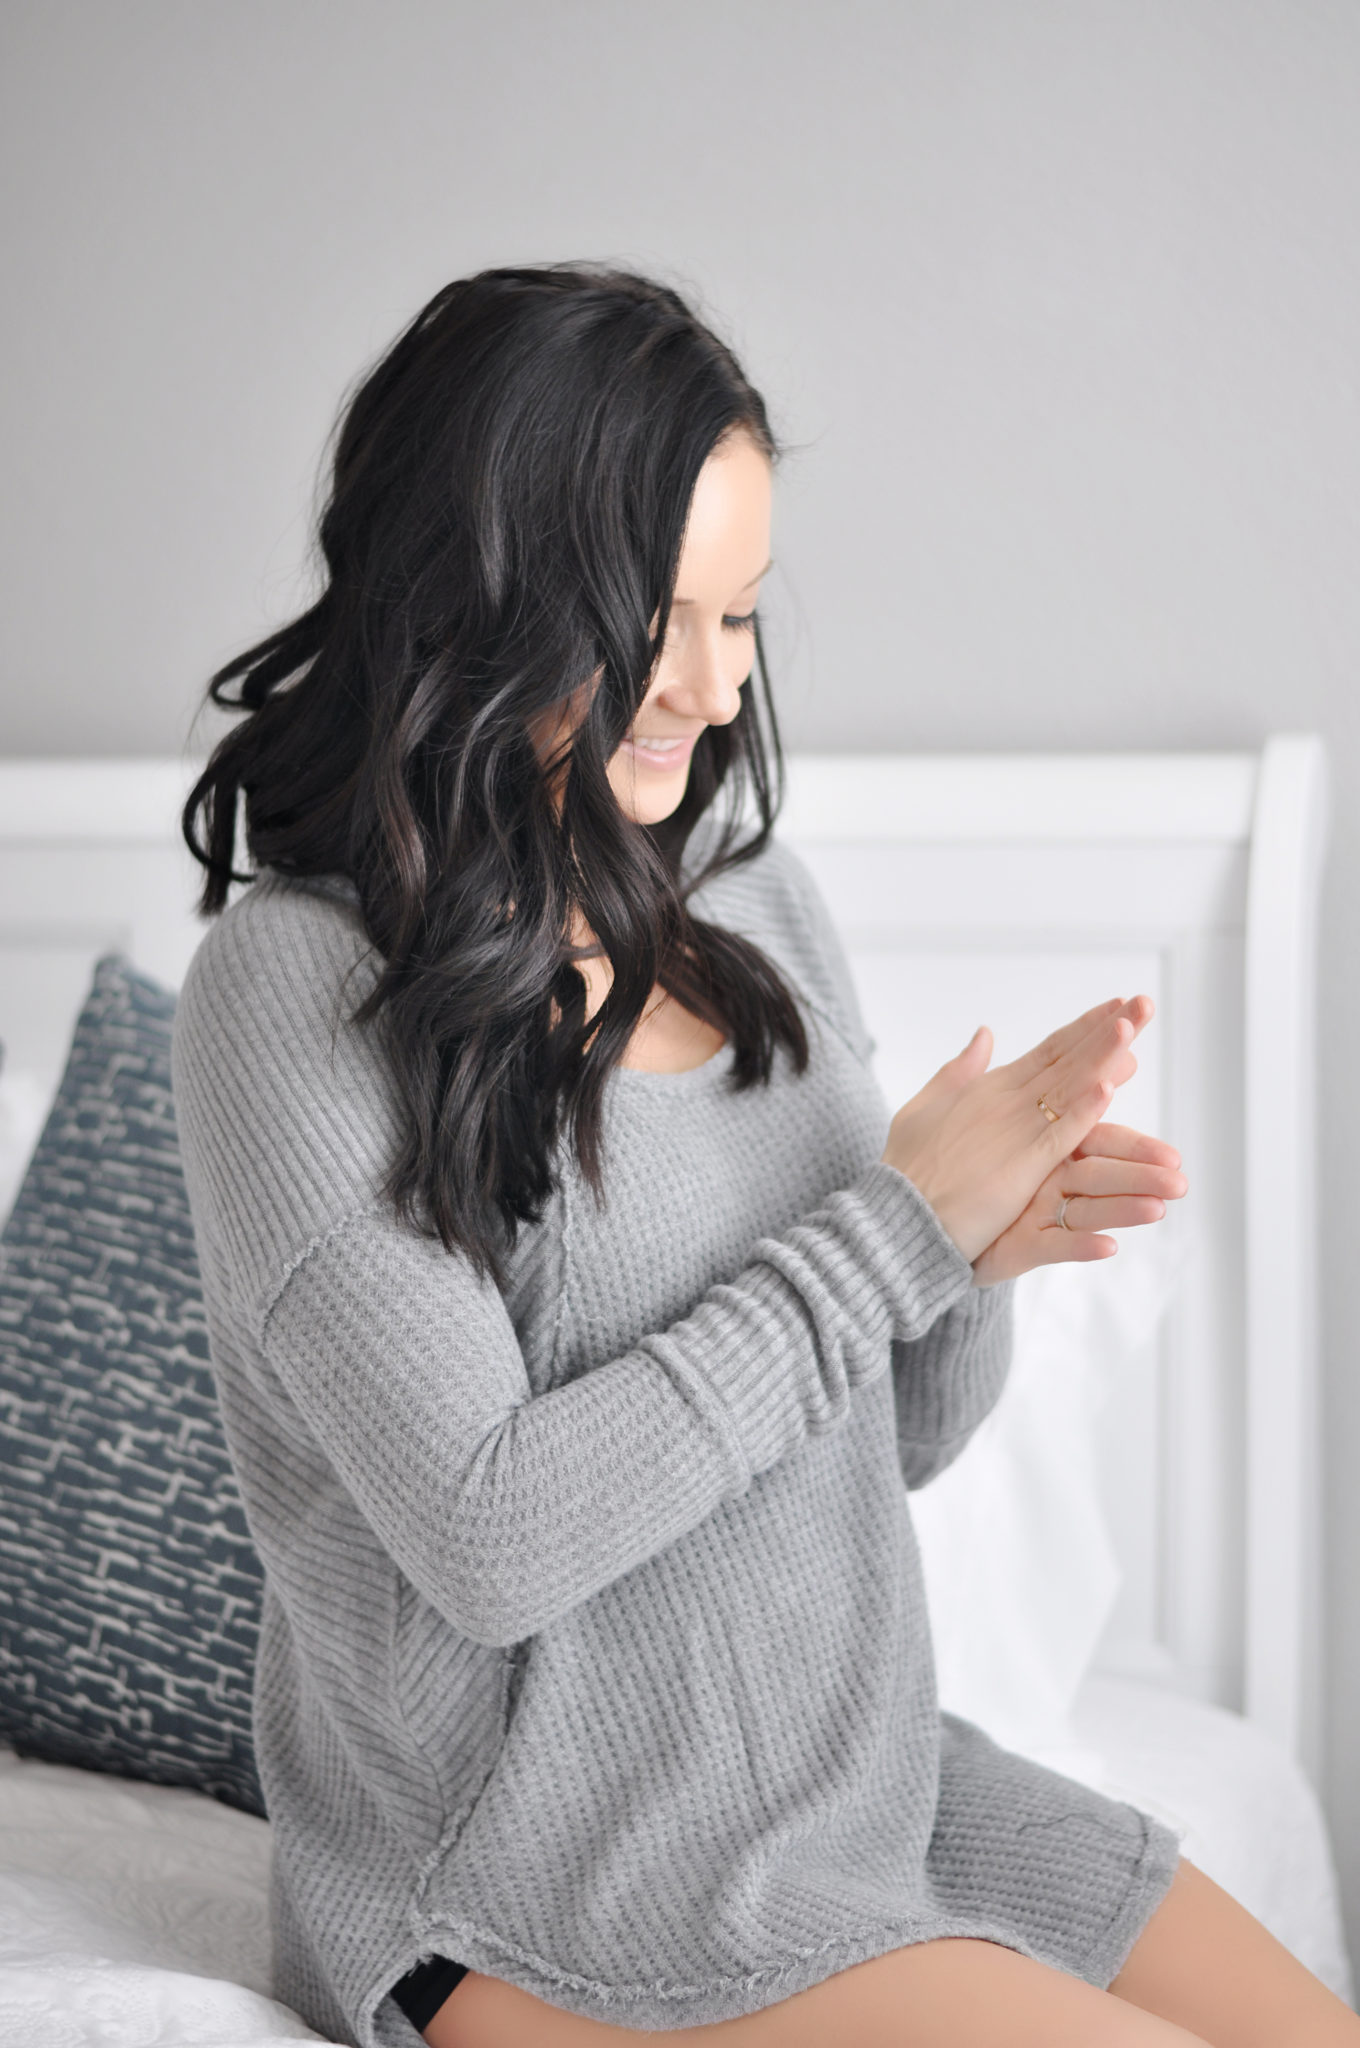 My Go-To Stretch Mark Cream by popular Las Vegas style blogger and expecting mom Outfits & Outings